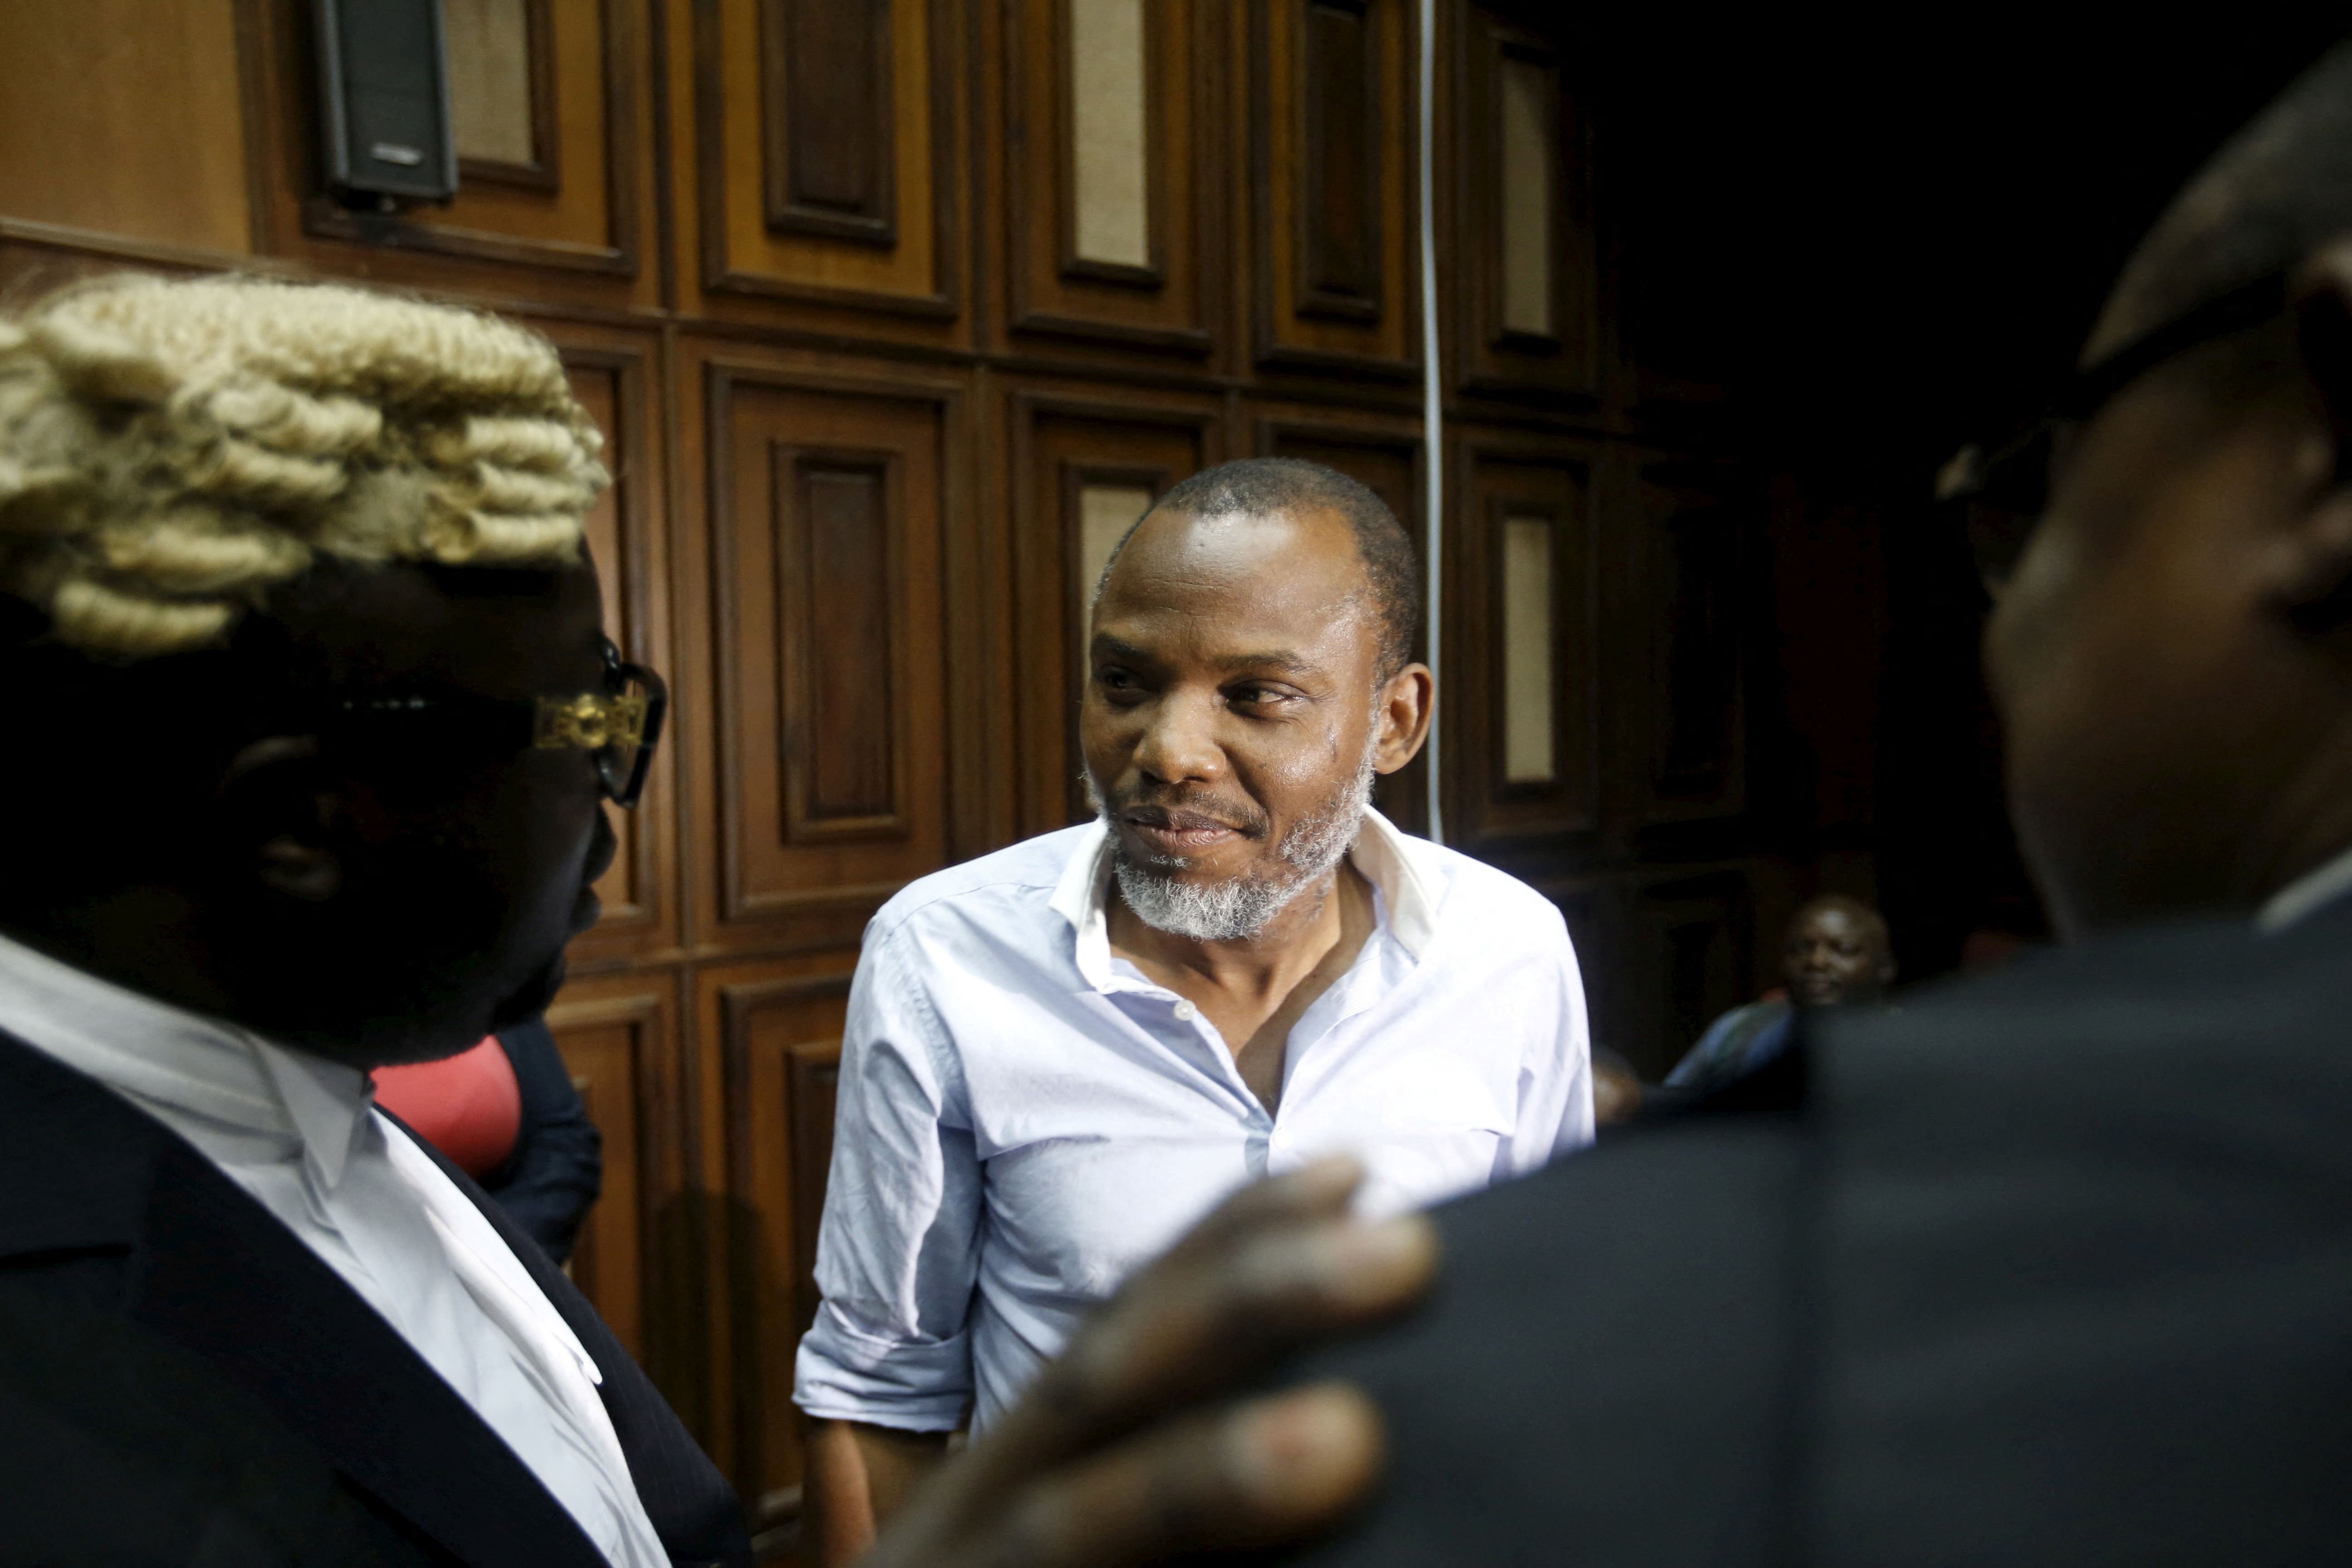 Indigenous People of Biafra (IPOB) leader Nnamdi Kanu seen at the Federal high court Abuja, Nigeria